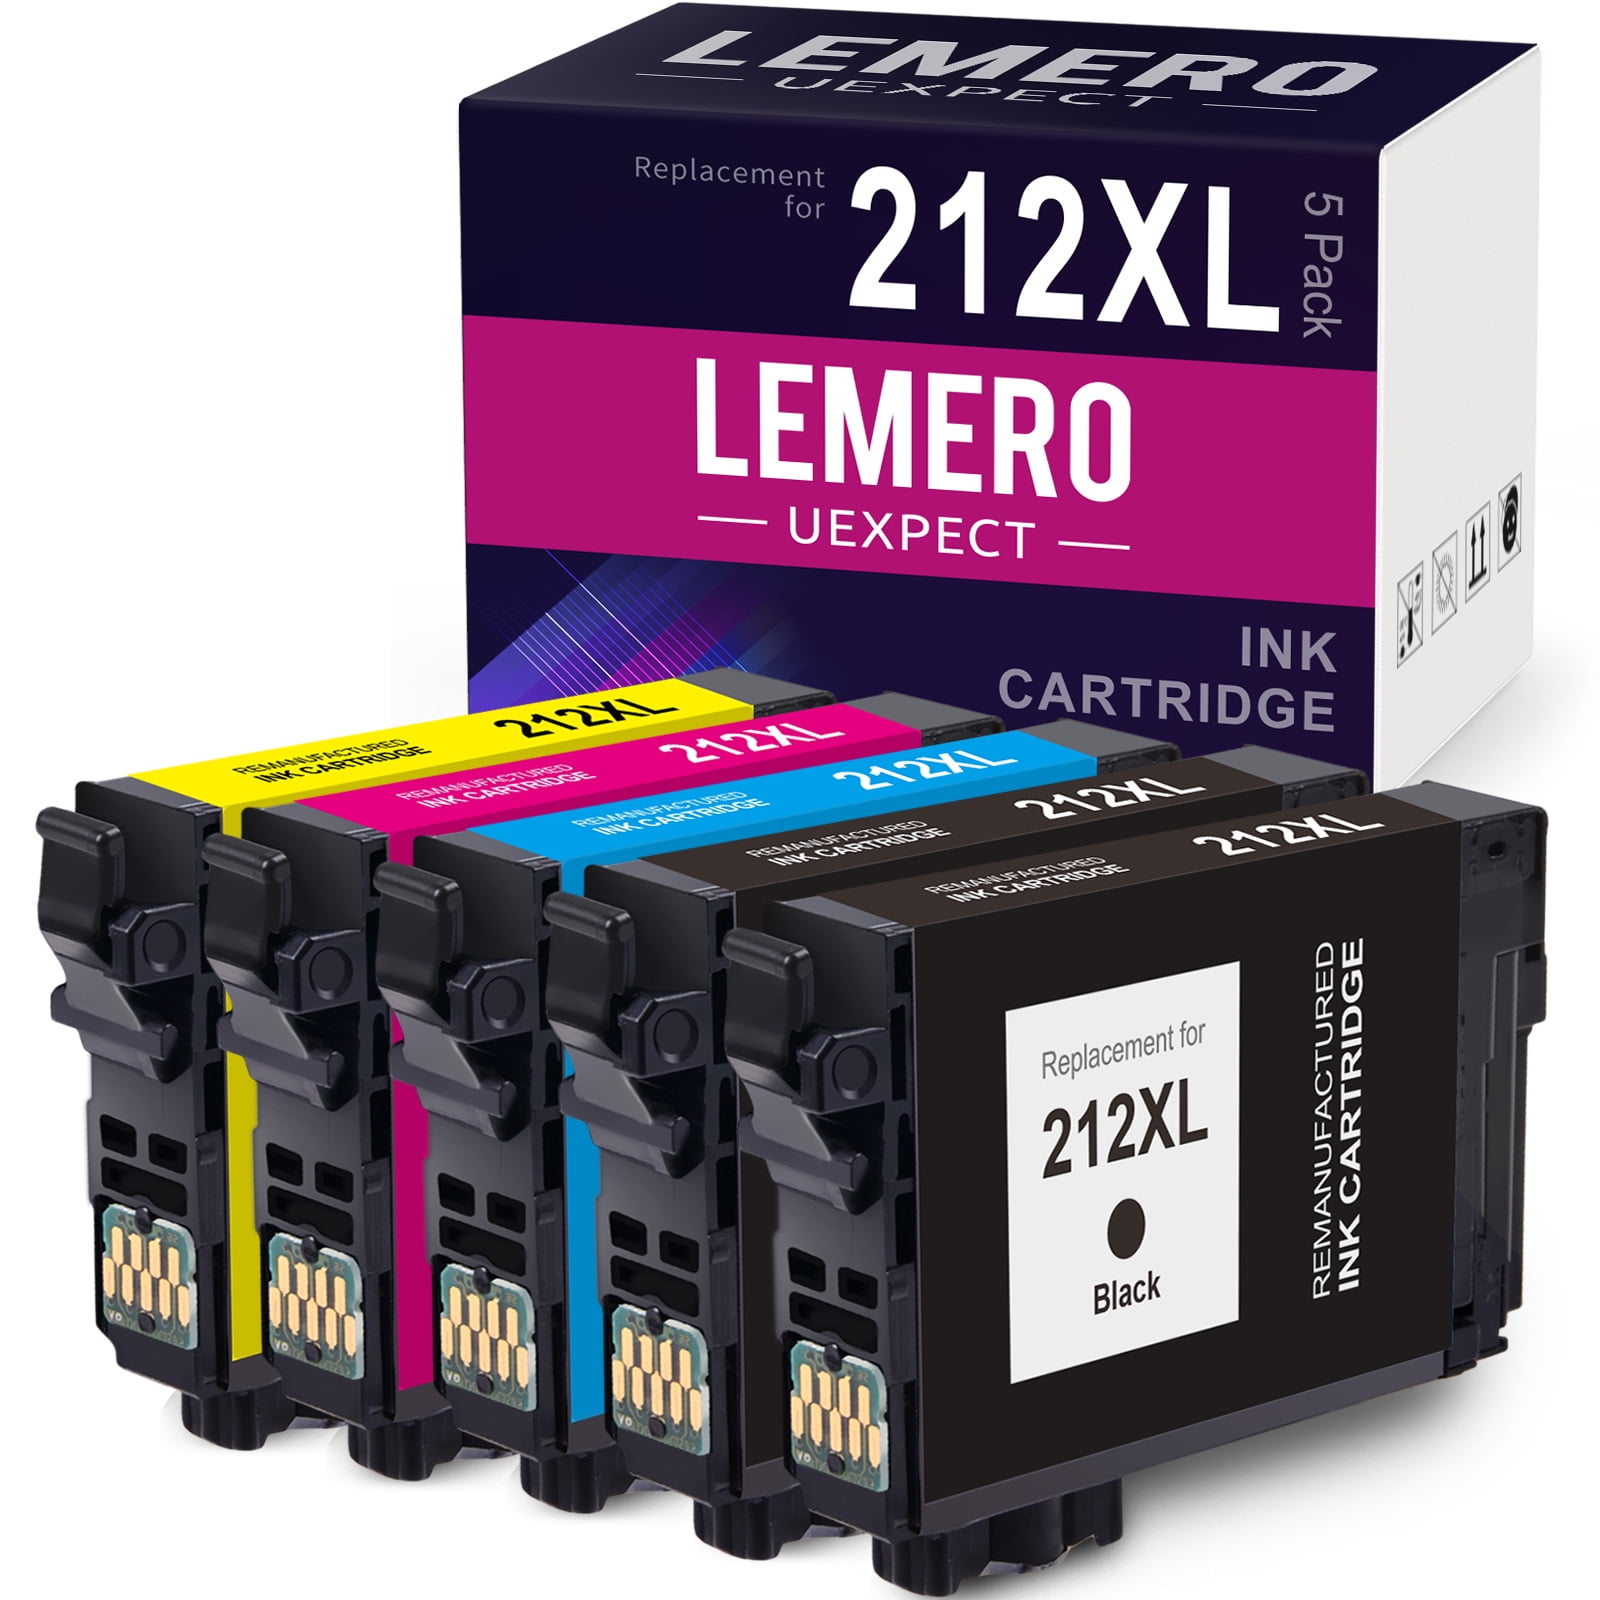 212xl 212 Ink Cartridge For Epson 212 Xl 212xl T212xl For Epson Expression Home Xp 4105 Xp 4100 8900